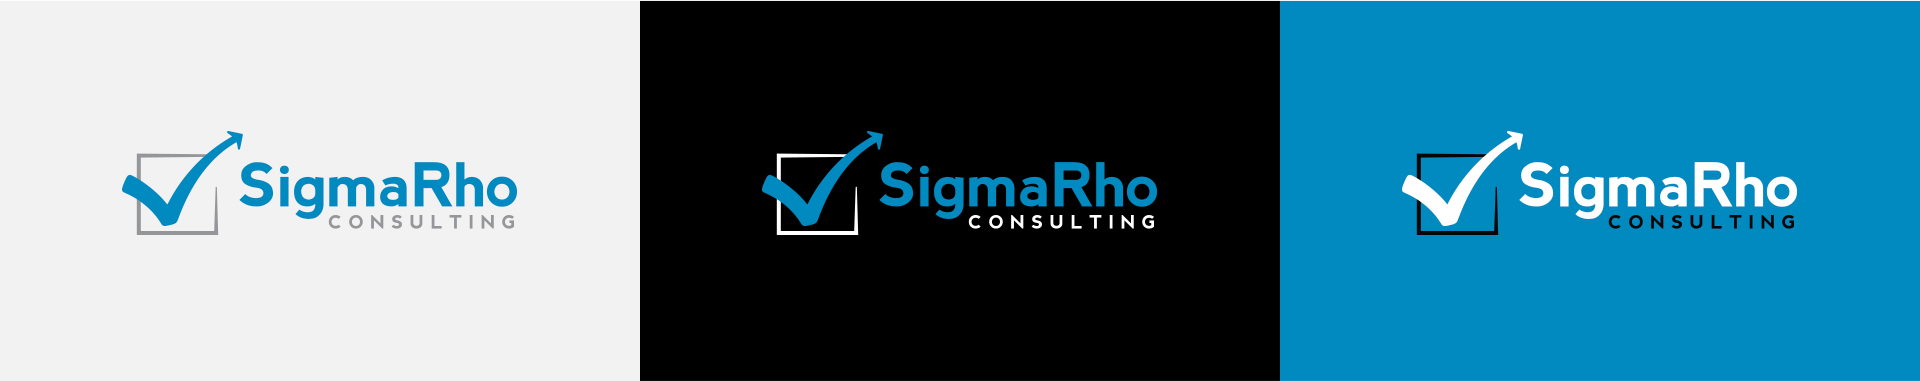 Horizontal orientation of Sigma Rho logo on different color backgrounds